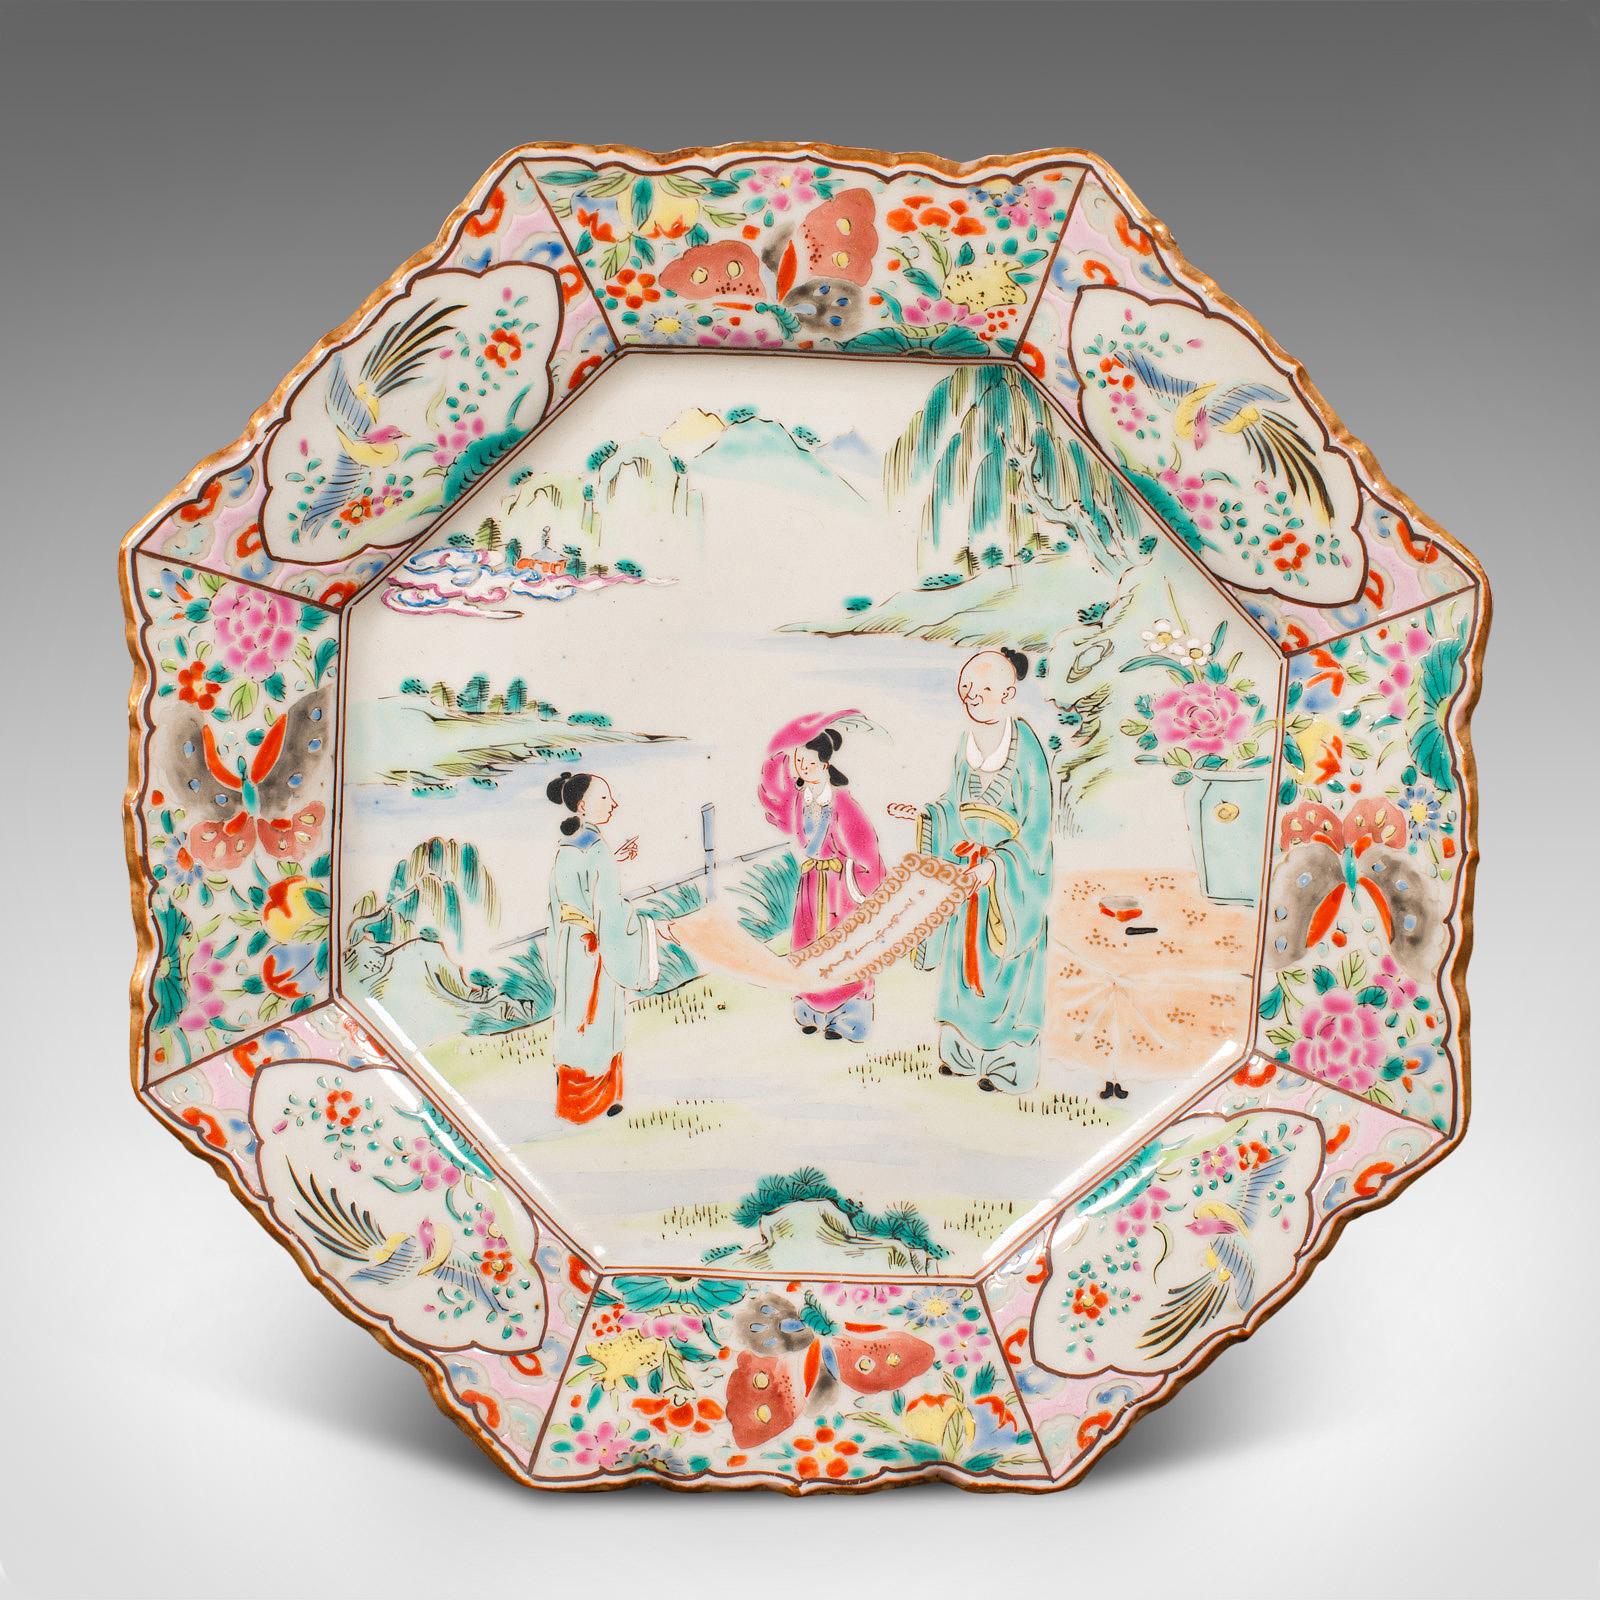 This is an antique octagonal serving plate. A Japanese, ceramic decorative charger, dating to the late Victorian period, circa 1900.

Vibrant and charming, with a wonderful decorative appeal
Displays a desirable aged patina and in good order
White